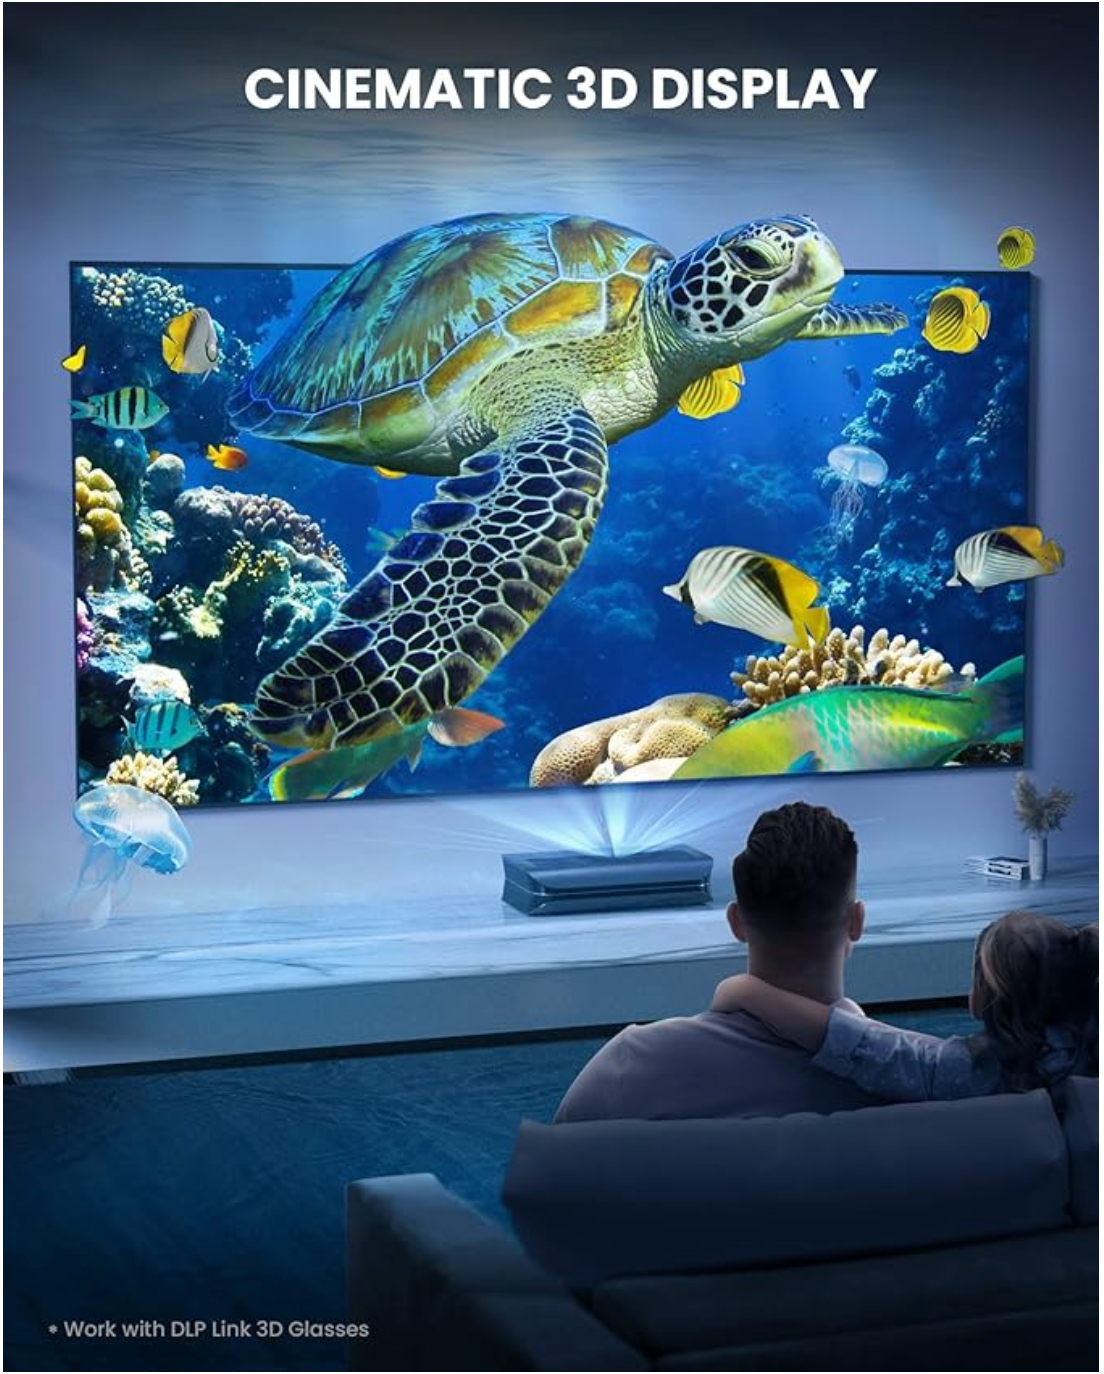 AWOL VISION LTV-2500 4K UHD Ultra Short Throw Triple Laser Projector with Dolby Vision & Atmos, Active 3D, 150", 2600 Peak Lumens, HDR10+, UST Laser TV Projector (Fire TV Stick 4K Max included)